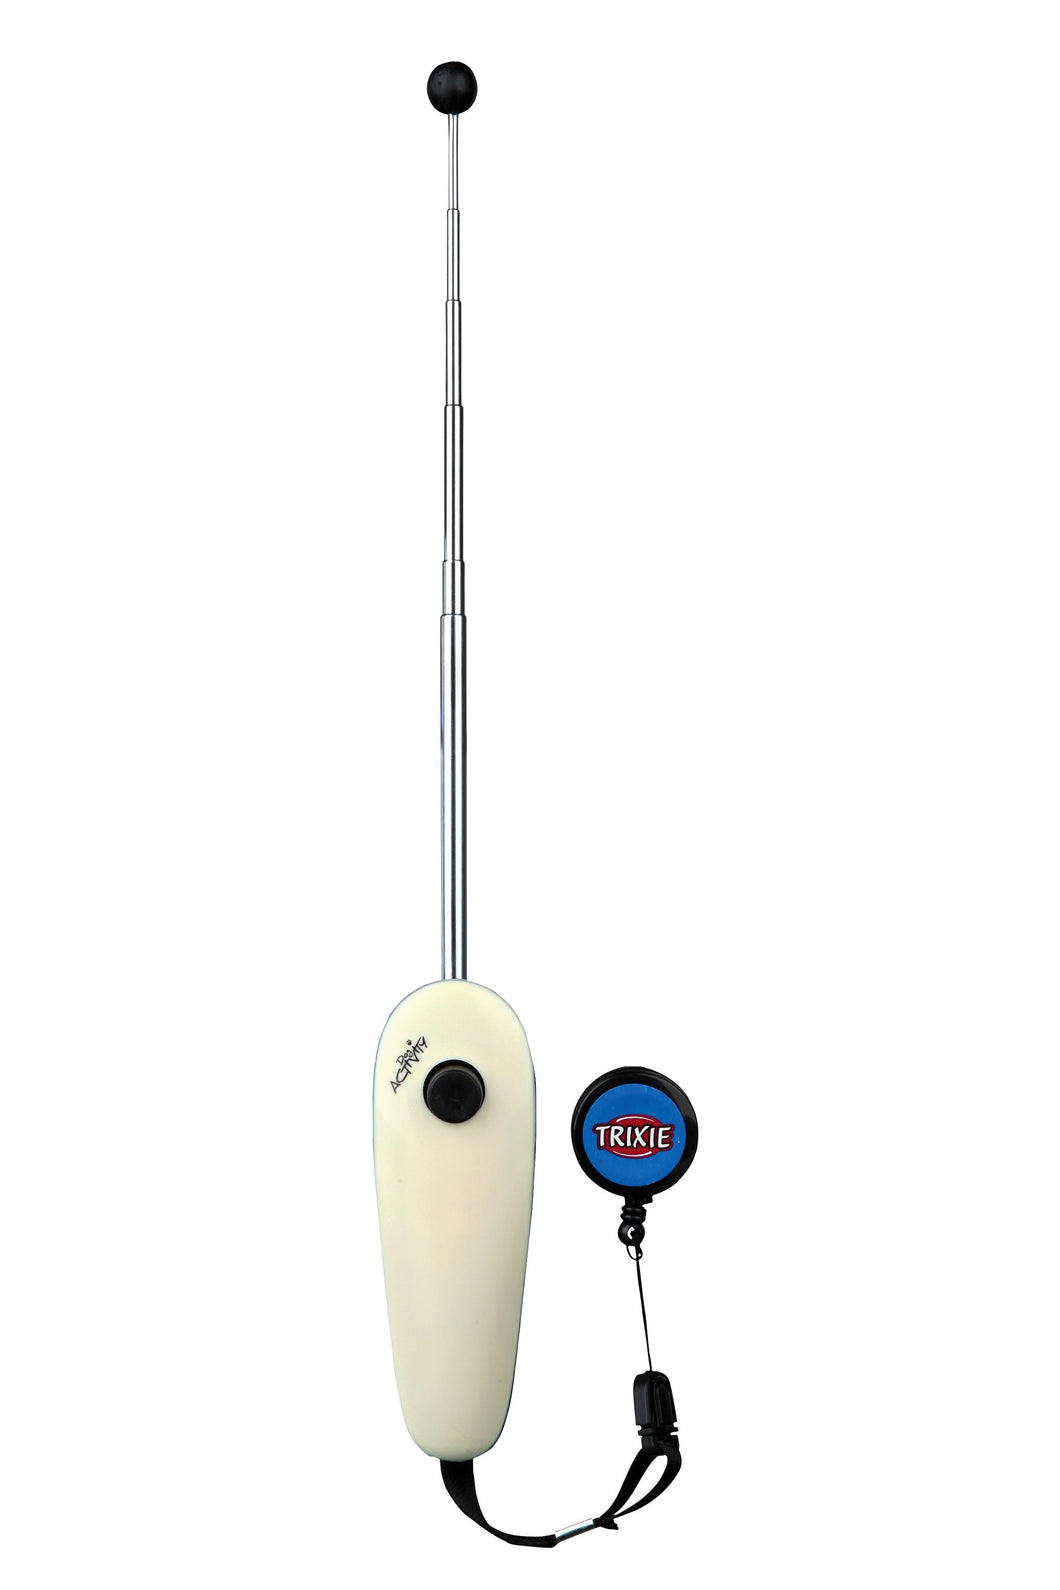 Target Stick with Clicker